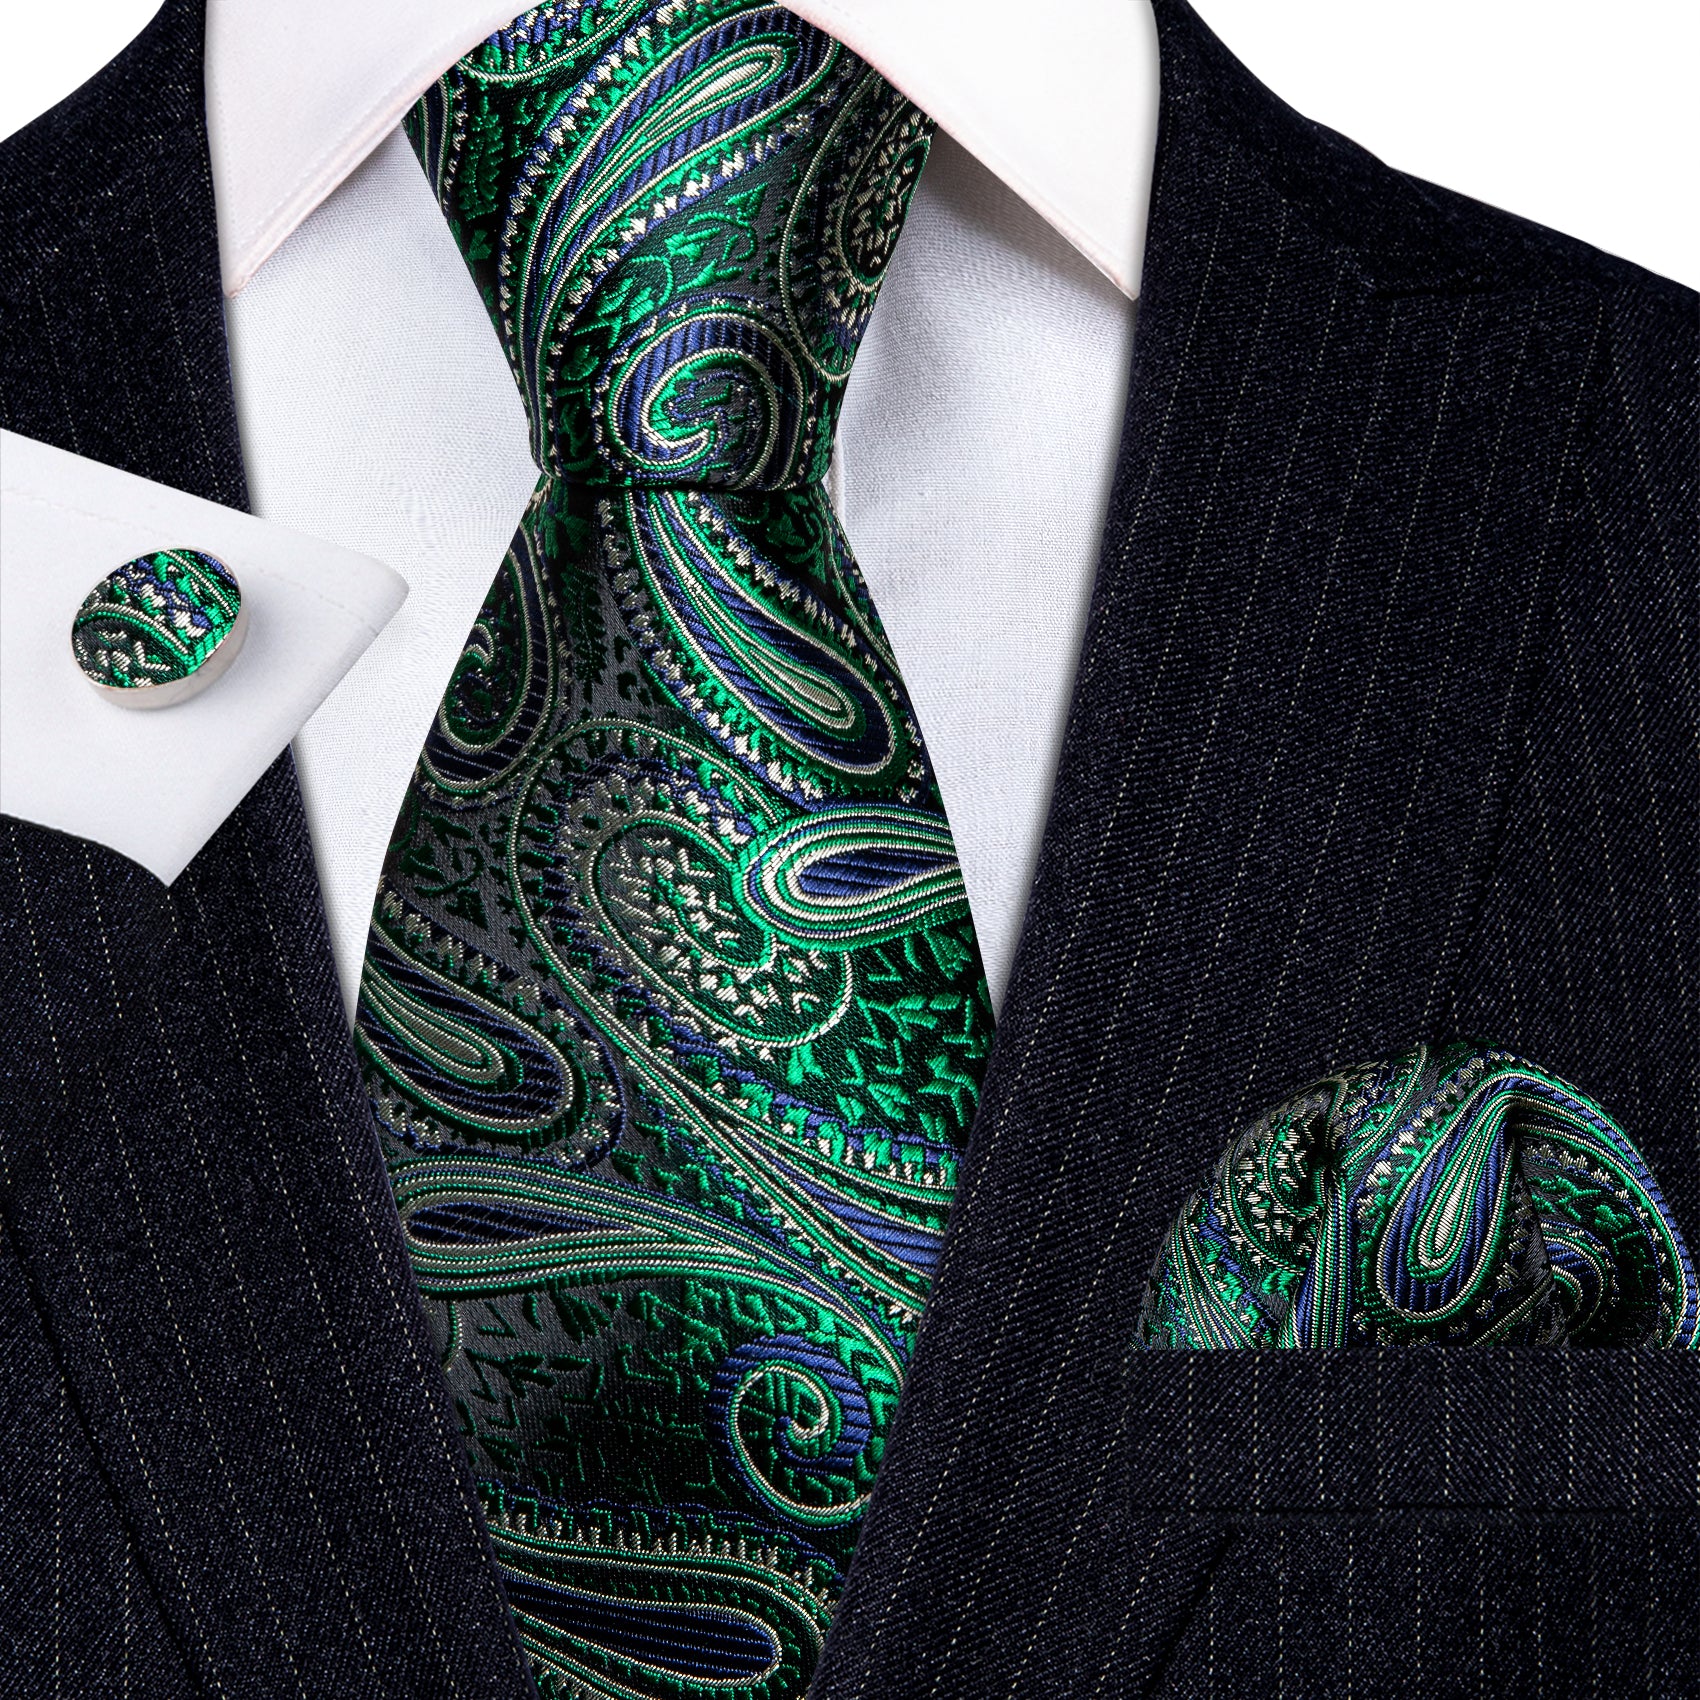 Barry Wang Green Tie Paisley Silk Men's Tie Pocket Square Cufflinks Set with Brooches